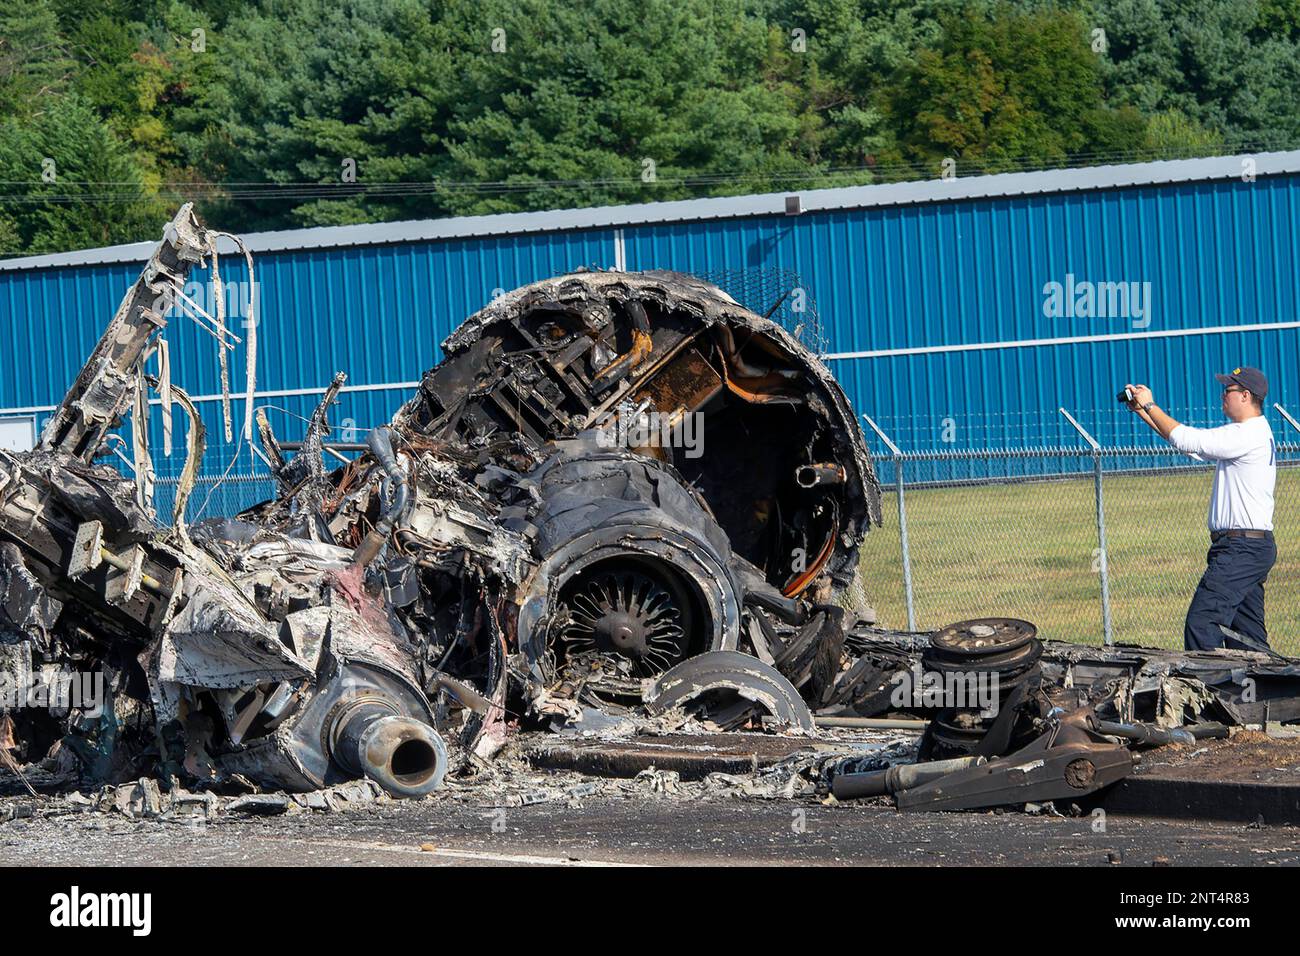 what happened to dale earnhardts dog in plane crash